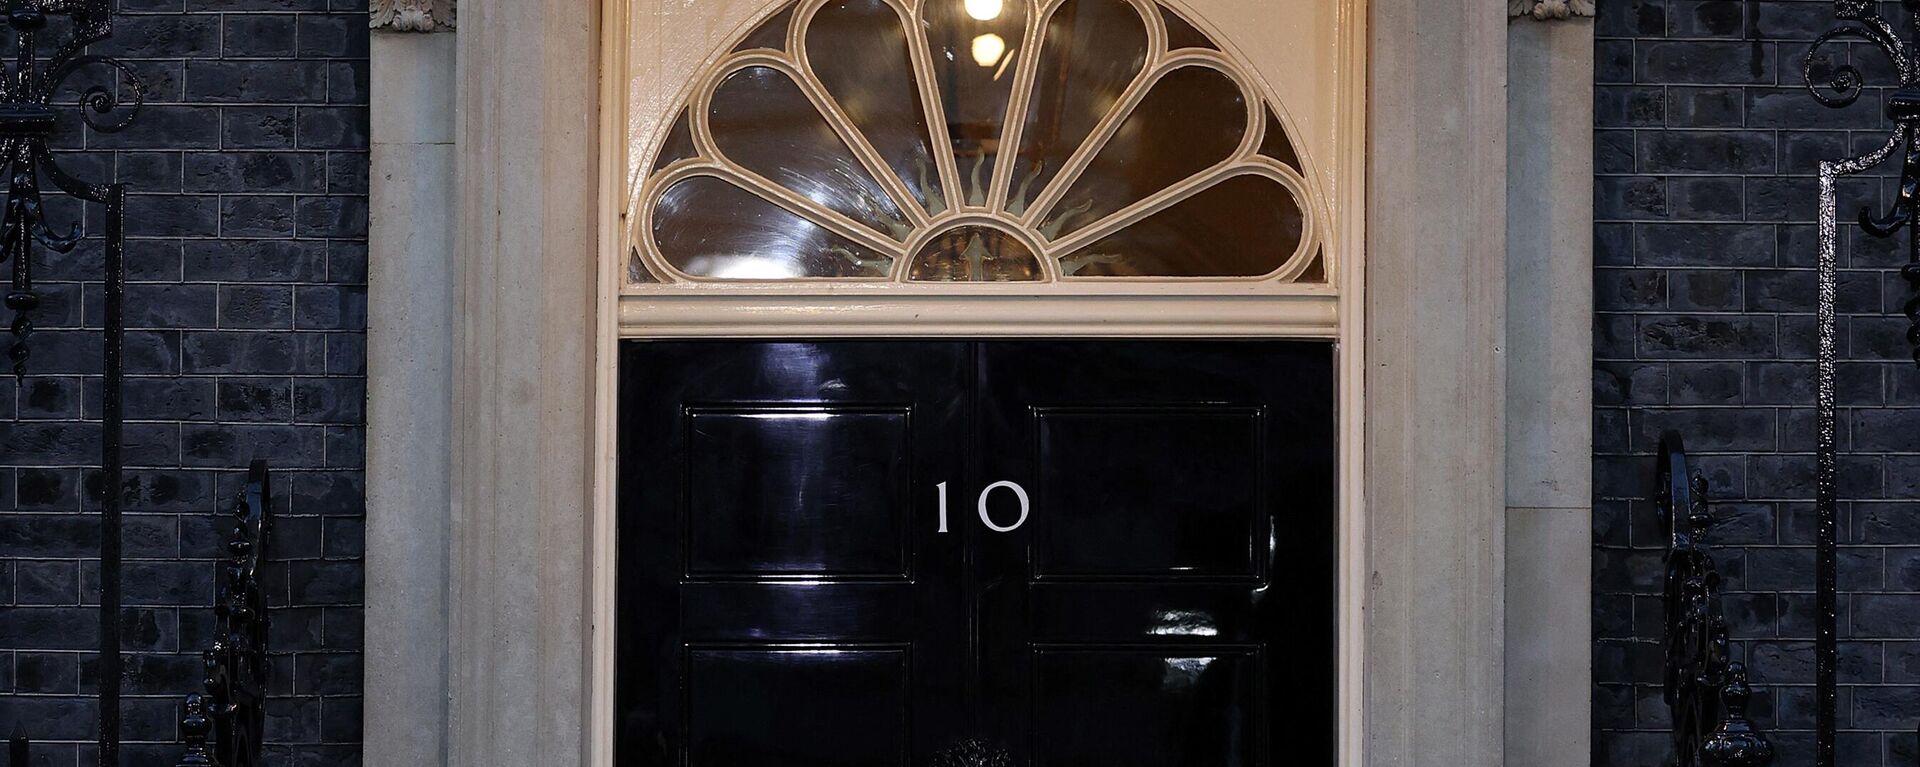 The door of 10 Downing Street, the official residence of Britain's Prime Minister, is pitcured in central London, on September 6, 2022.  - Sputnik International, 1920, 06.09.2022